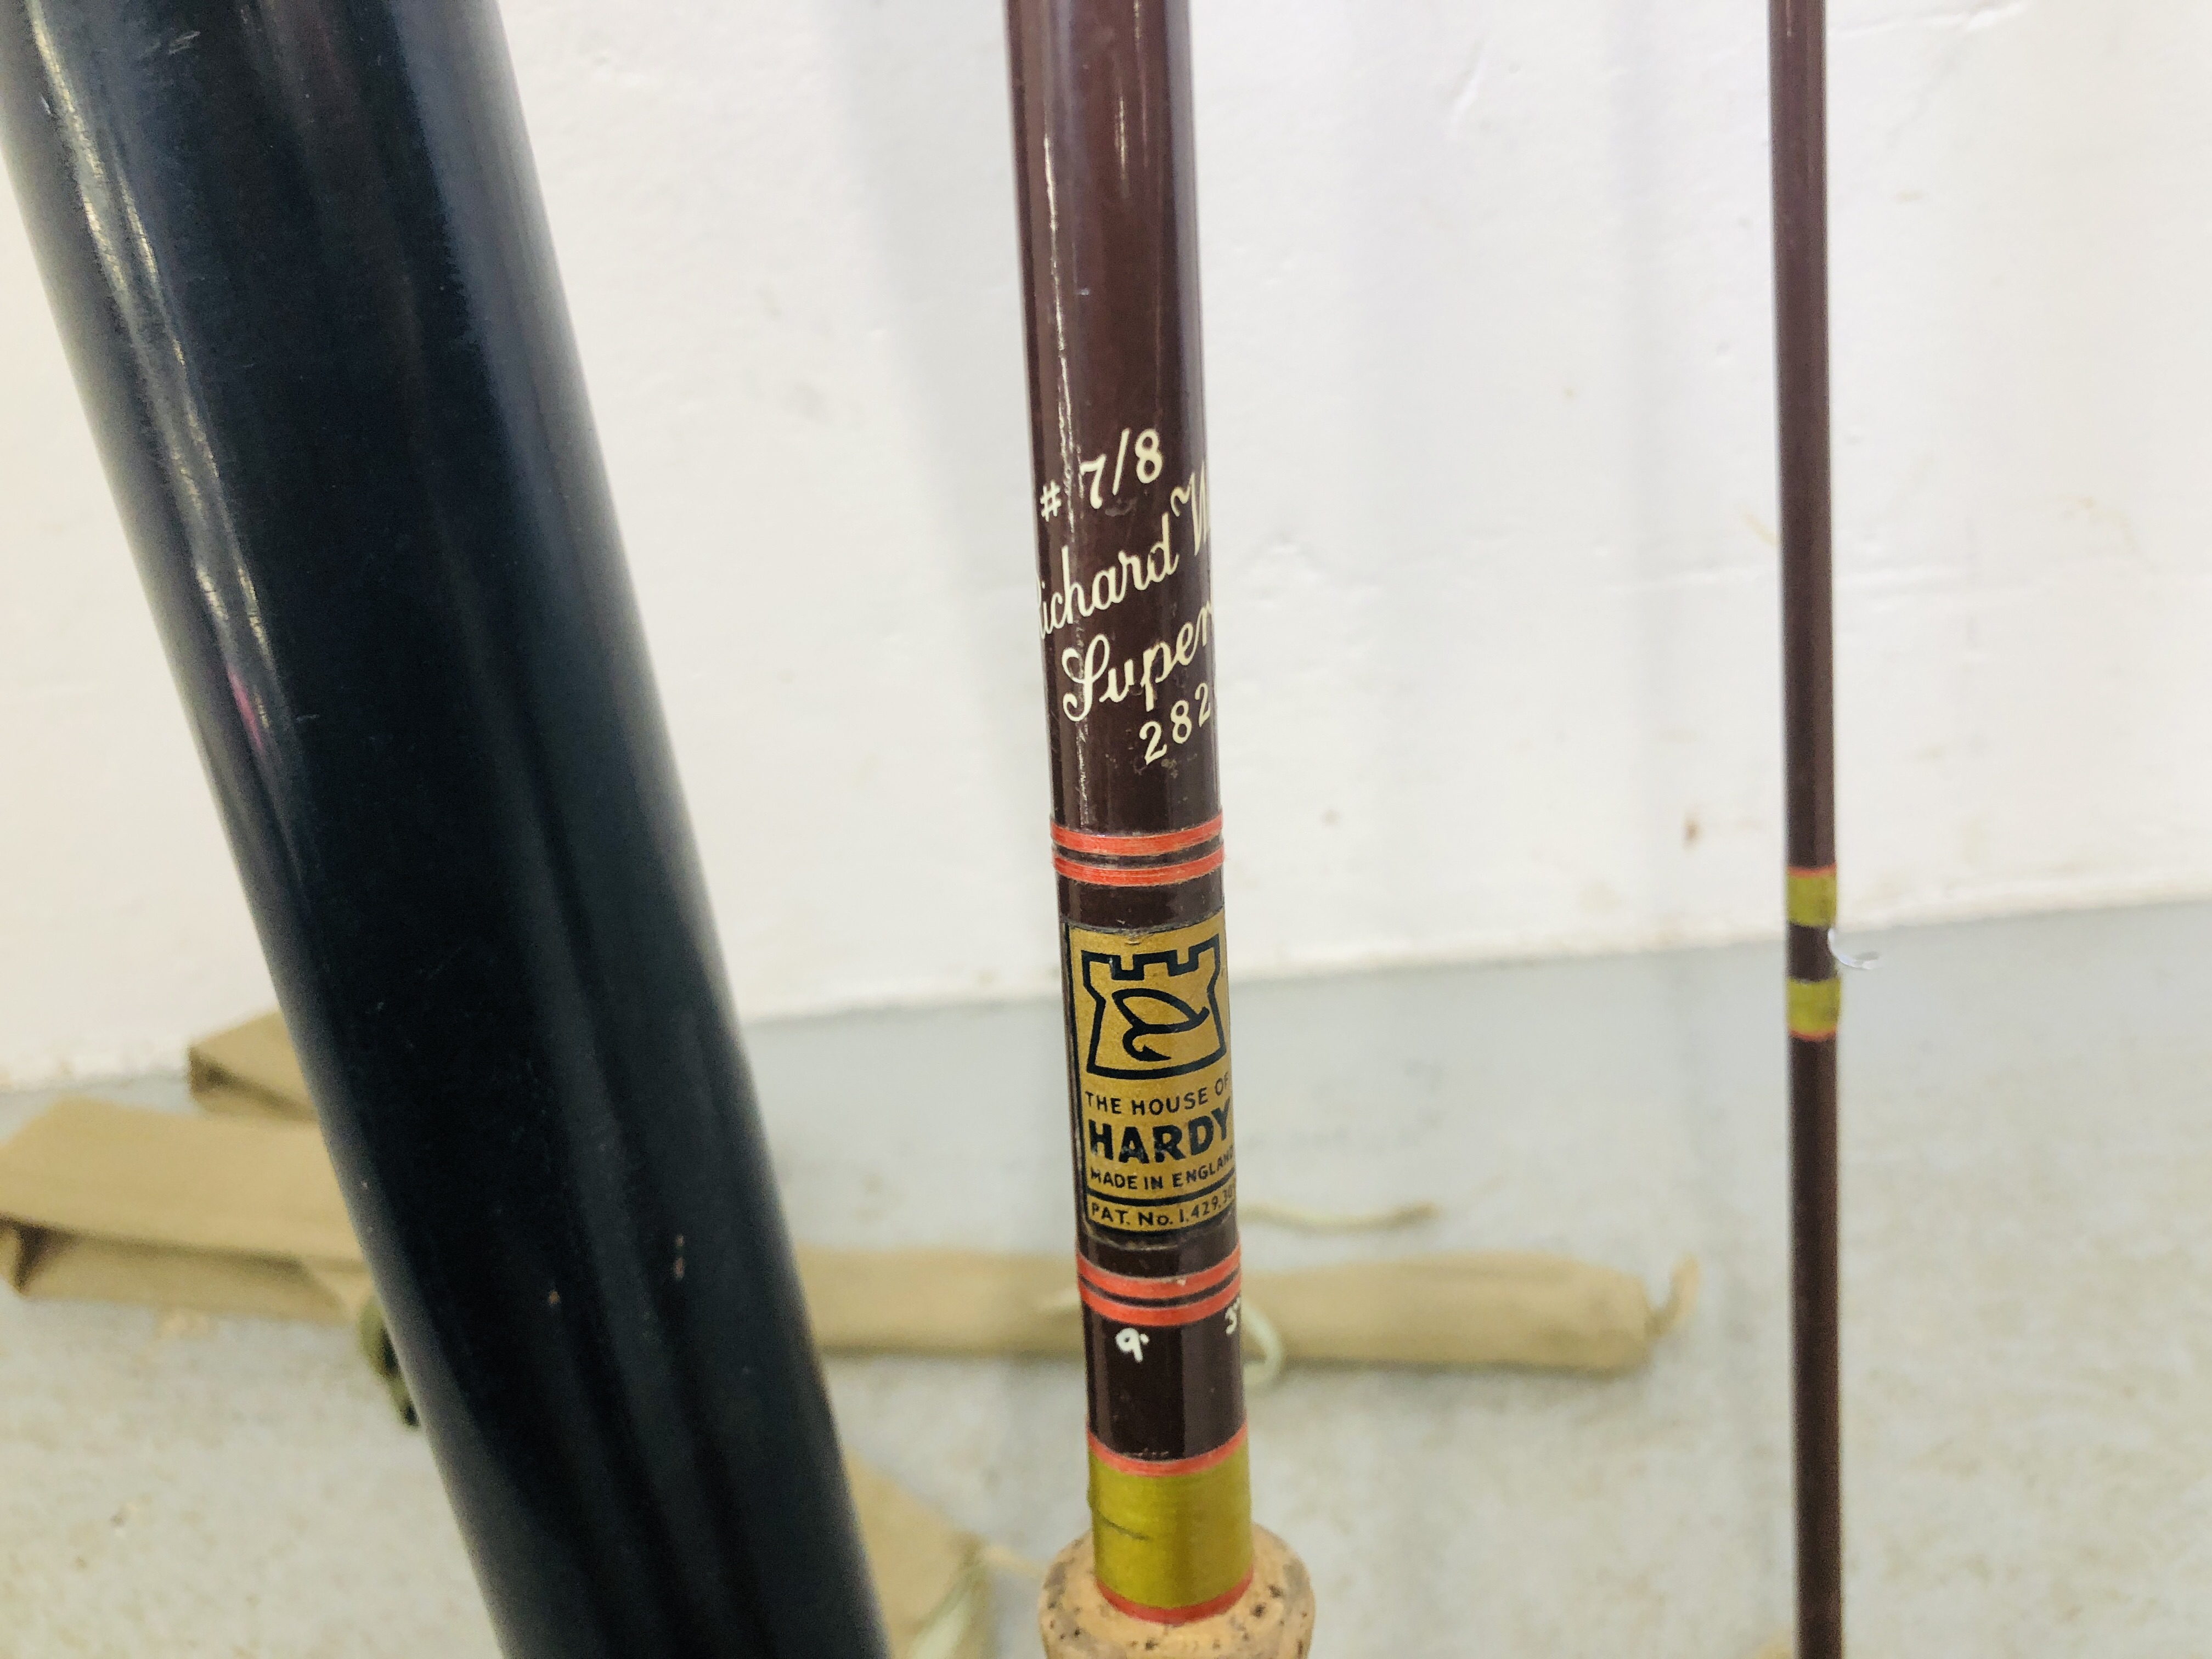 A HARDY 2 PIECE 9 FT 3 INCH RICHARD WALKER SUPER LIGHT FLY FISHING ROD #7/8 WITH SLEEVE AND TUBE. - Image 4 of 6